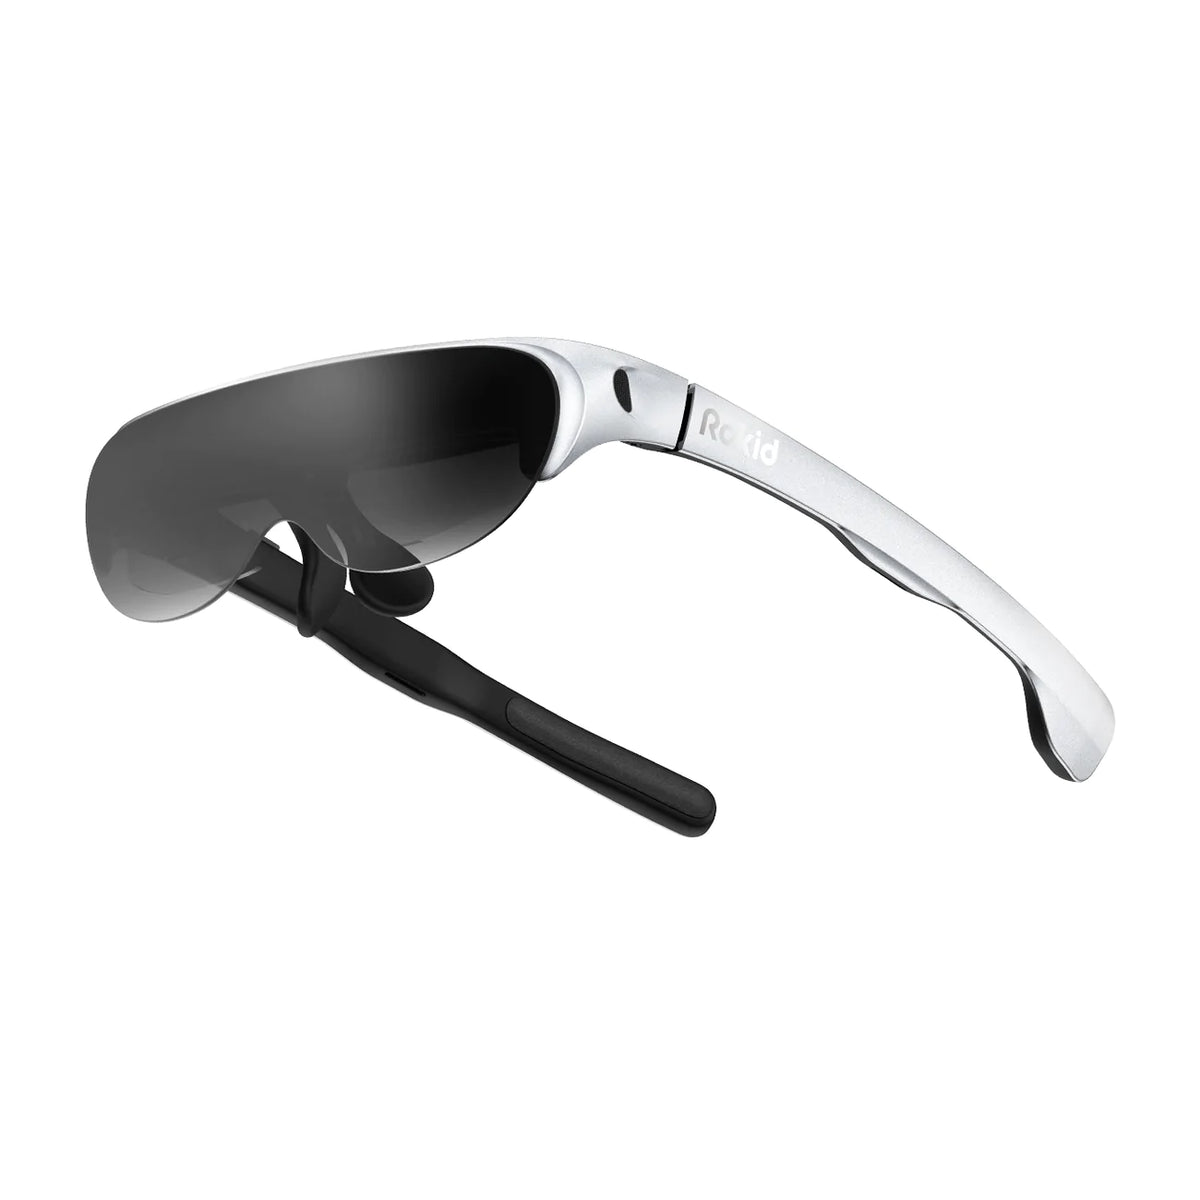 Rokid Air AR Glasses with Voice Control AI, Starry Grey | Rokid - Wake Concept Store  